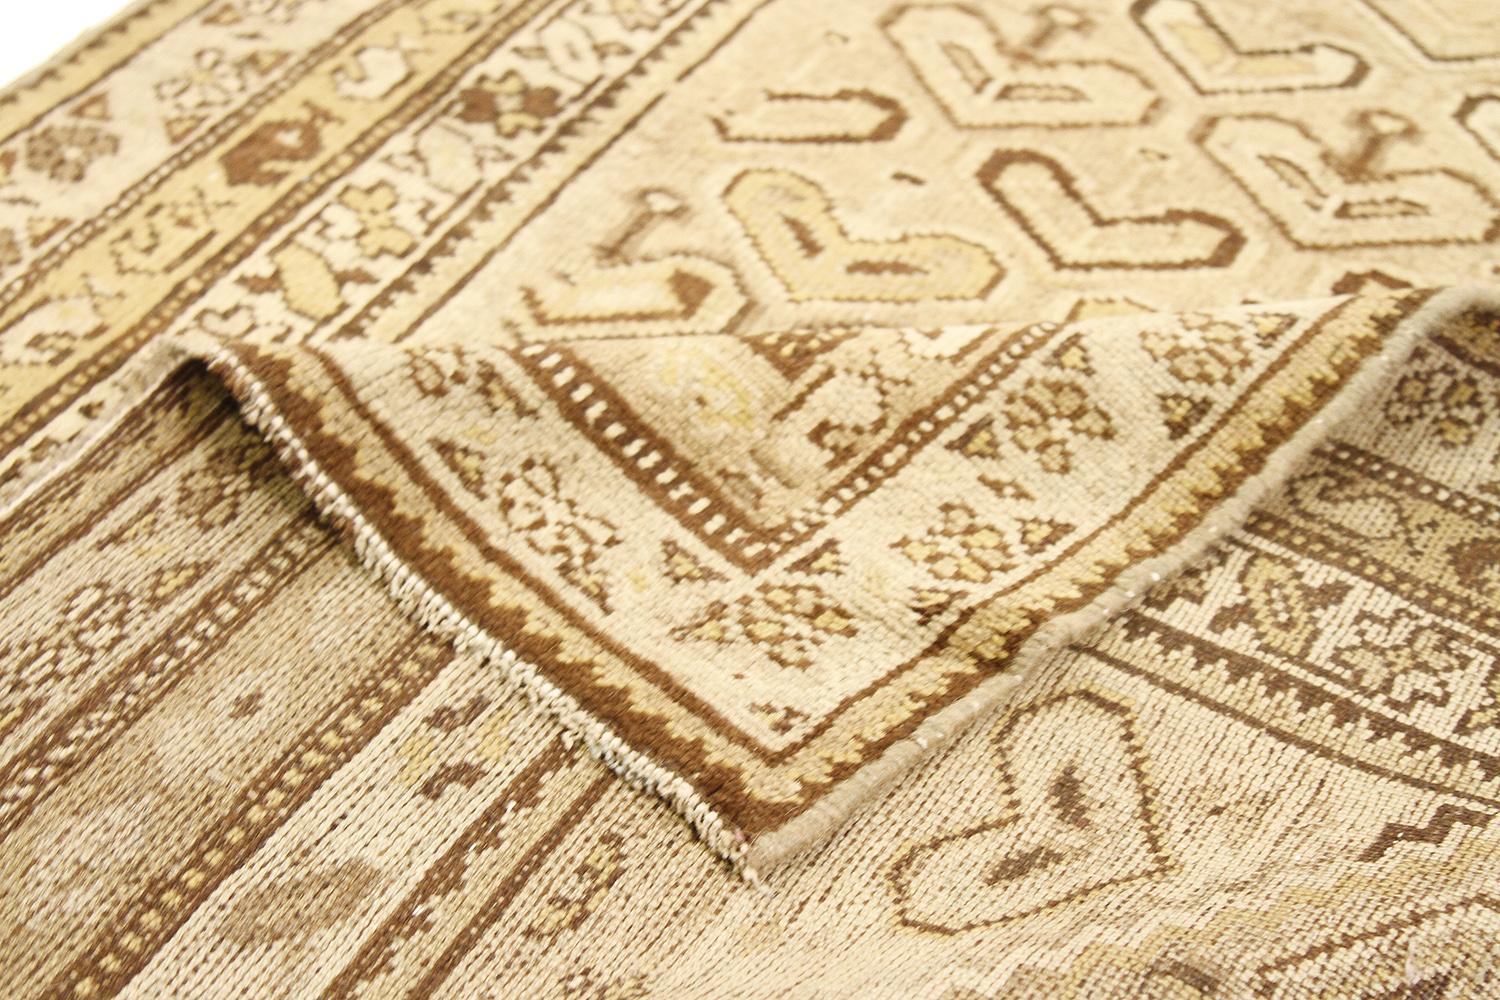 Hand-Woven Antique Persian Malayer Runner Rug with Brown and Beige Heart Shaped Patterns For Sale